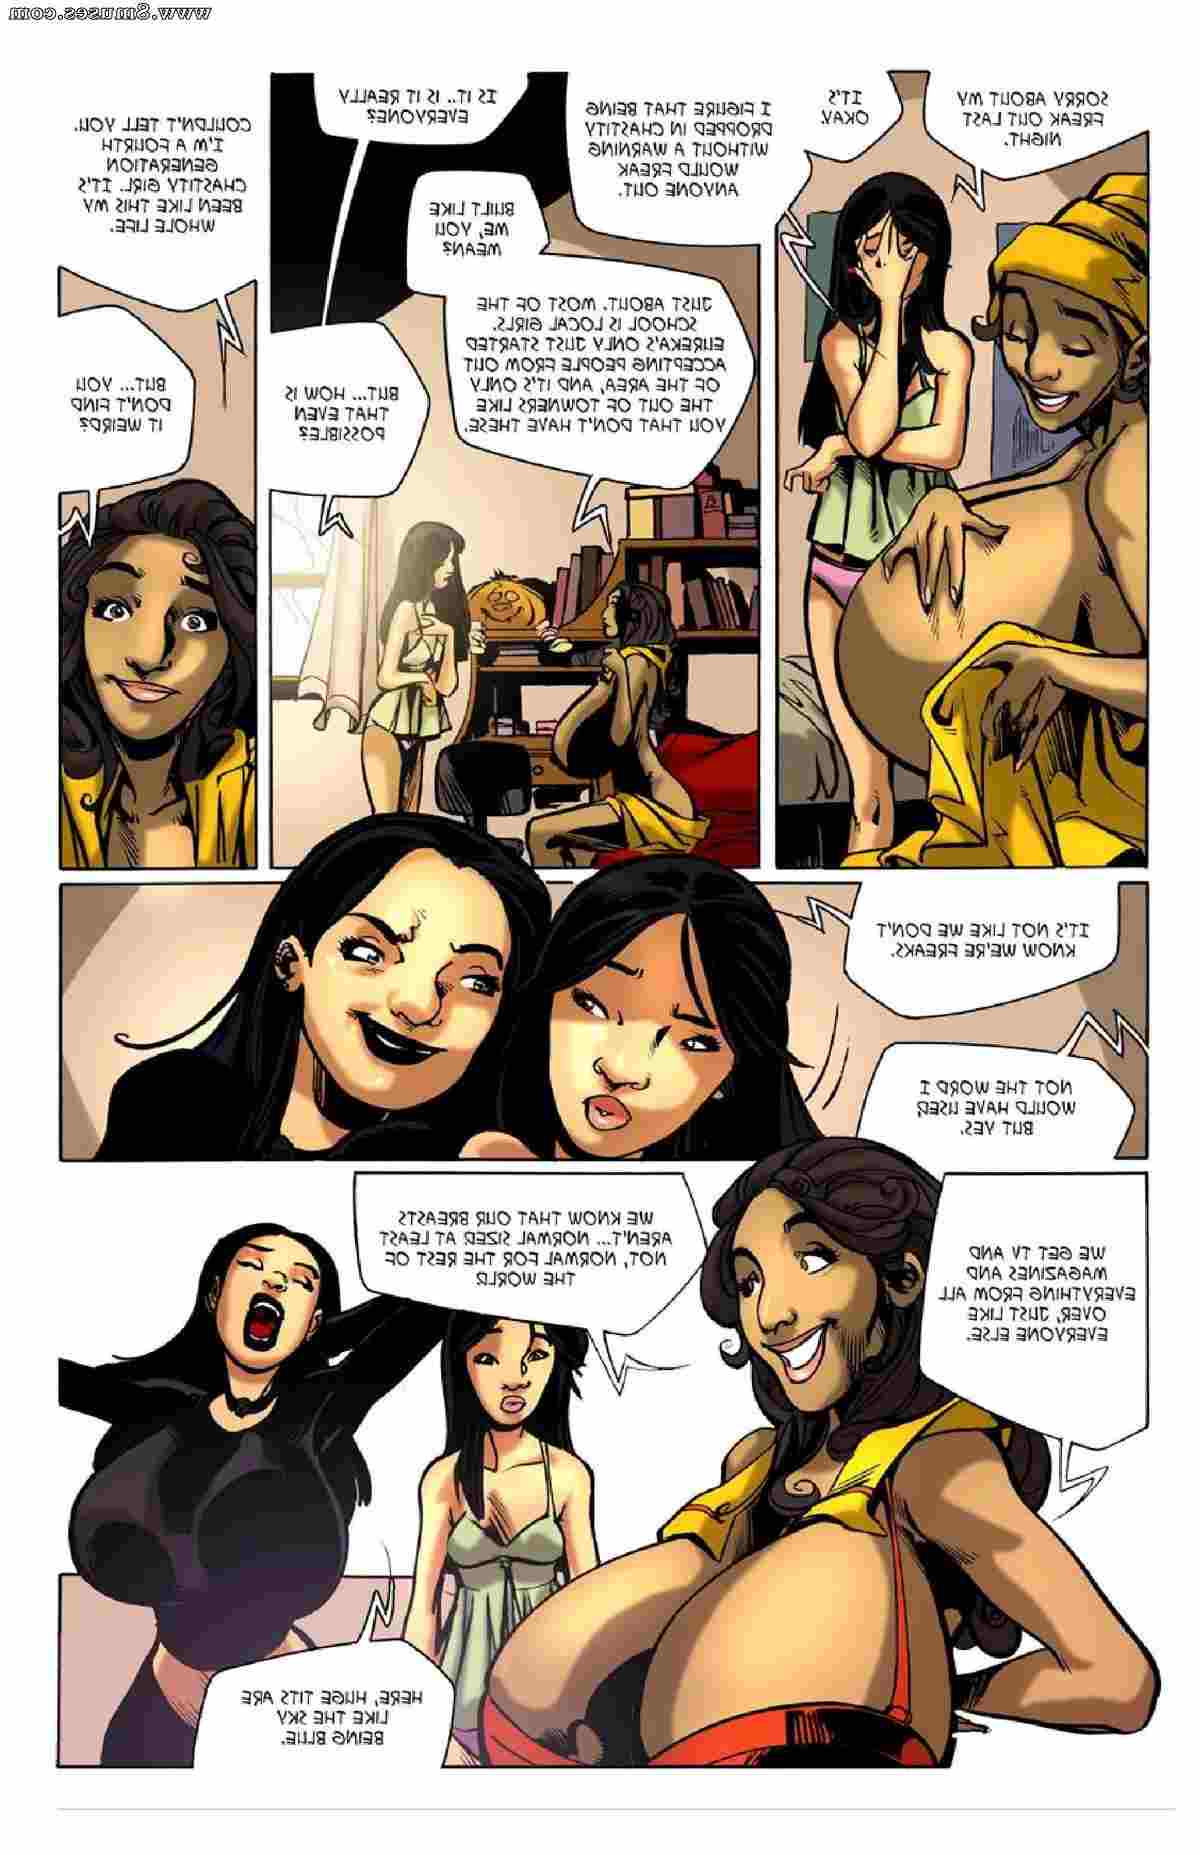 BE-Story-Club-Comics/Welcome-to-Chastity Welcome_to_Chastity__8muses_-_Sex_and_Porn_Comics_14.jpg